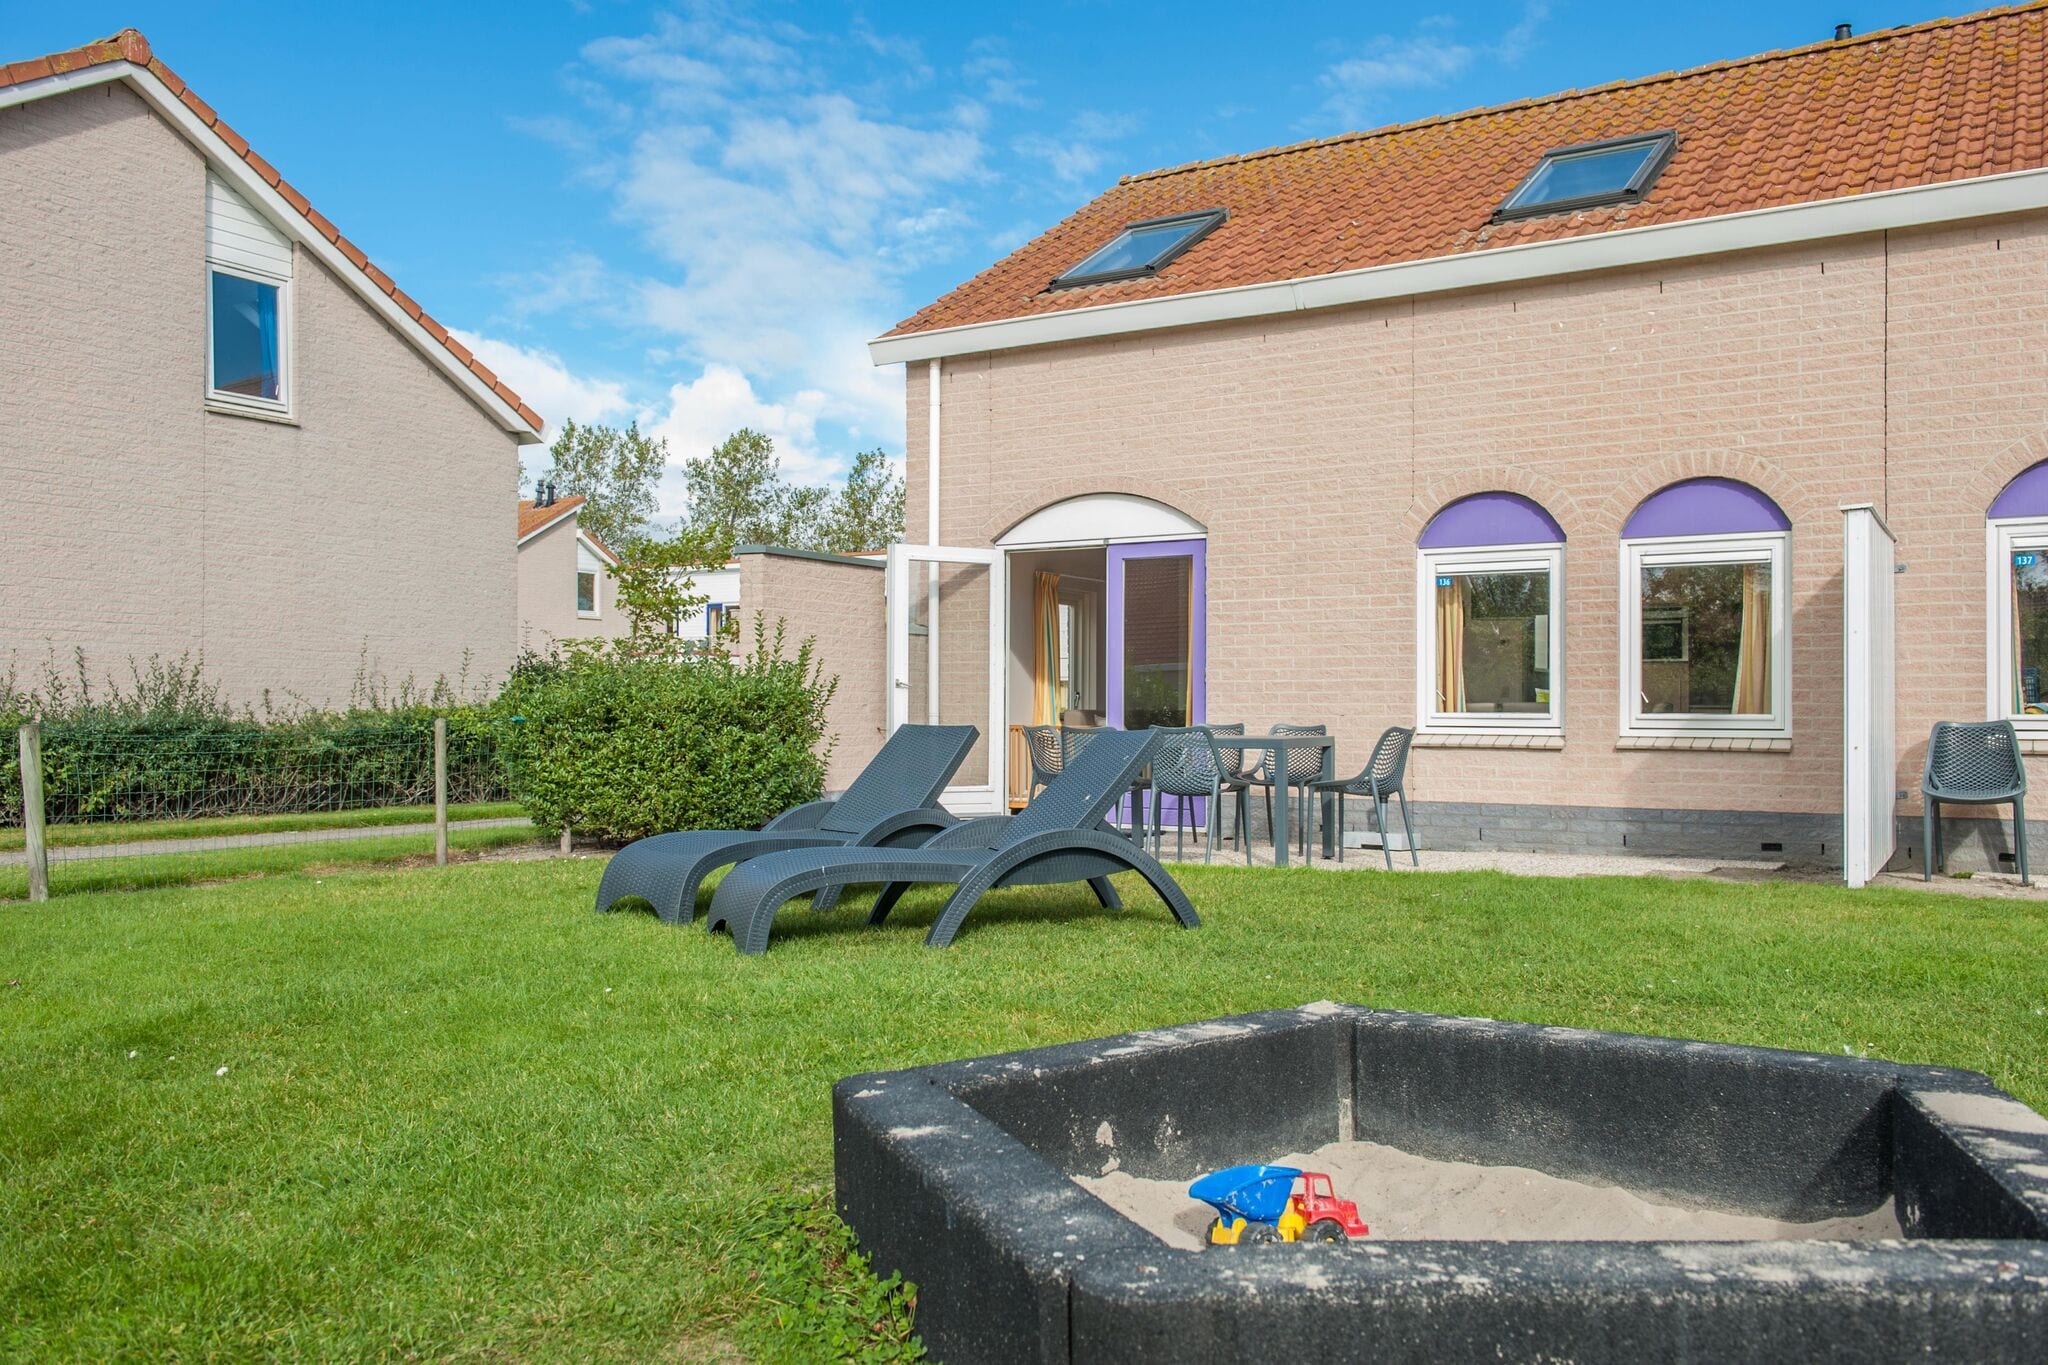 Child-friendly bungalow, 500 m from the beach